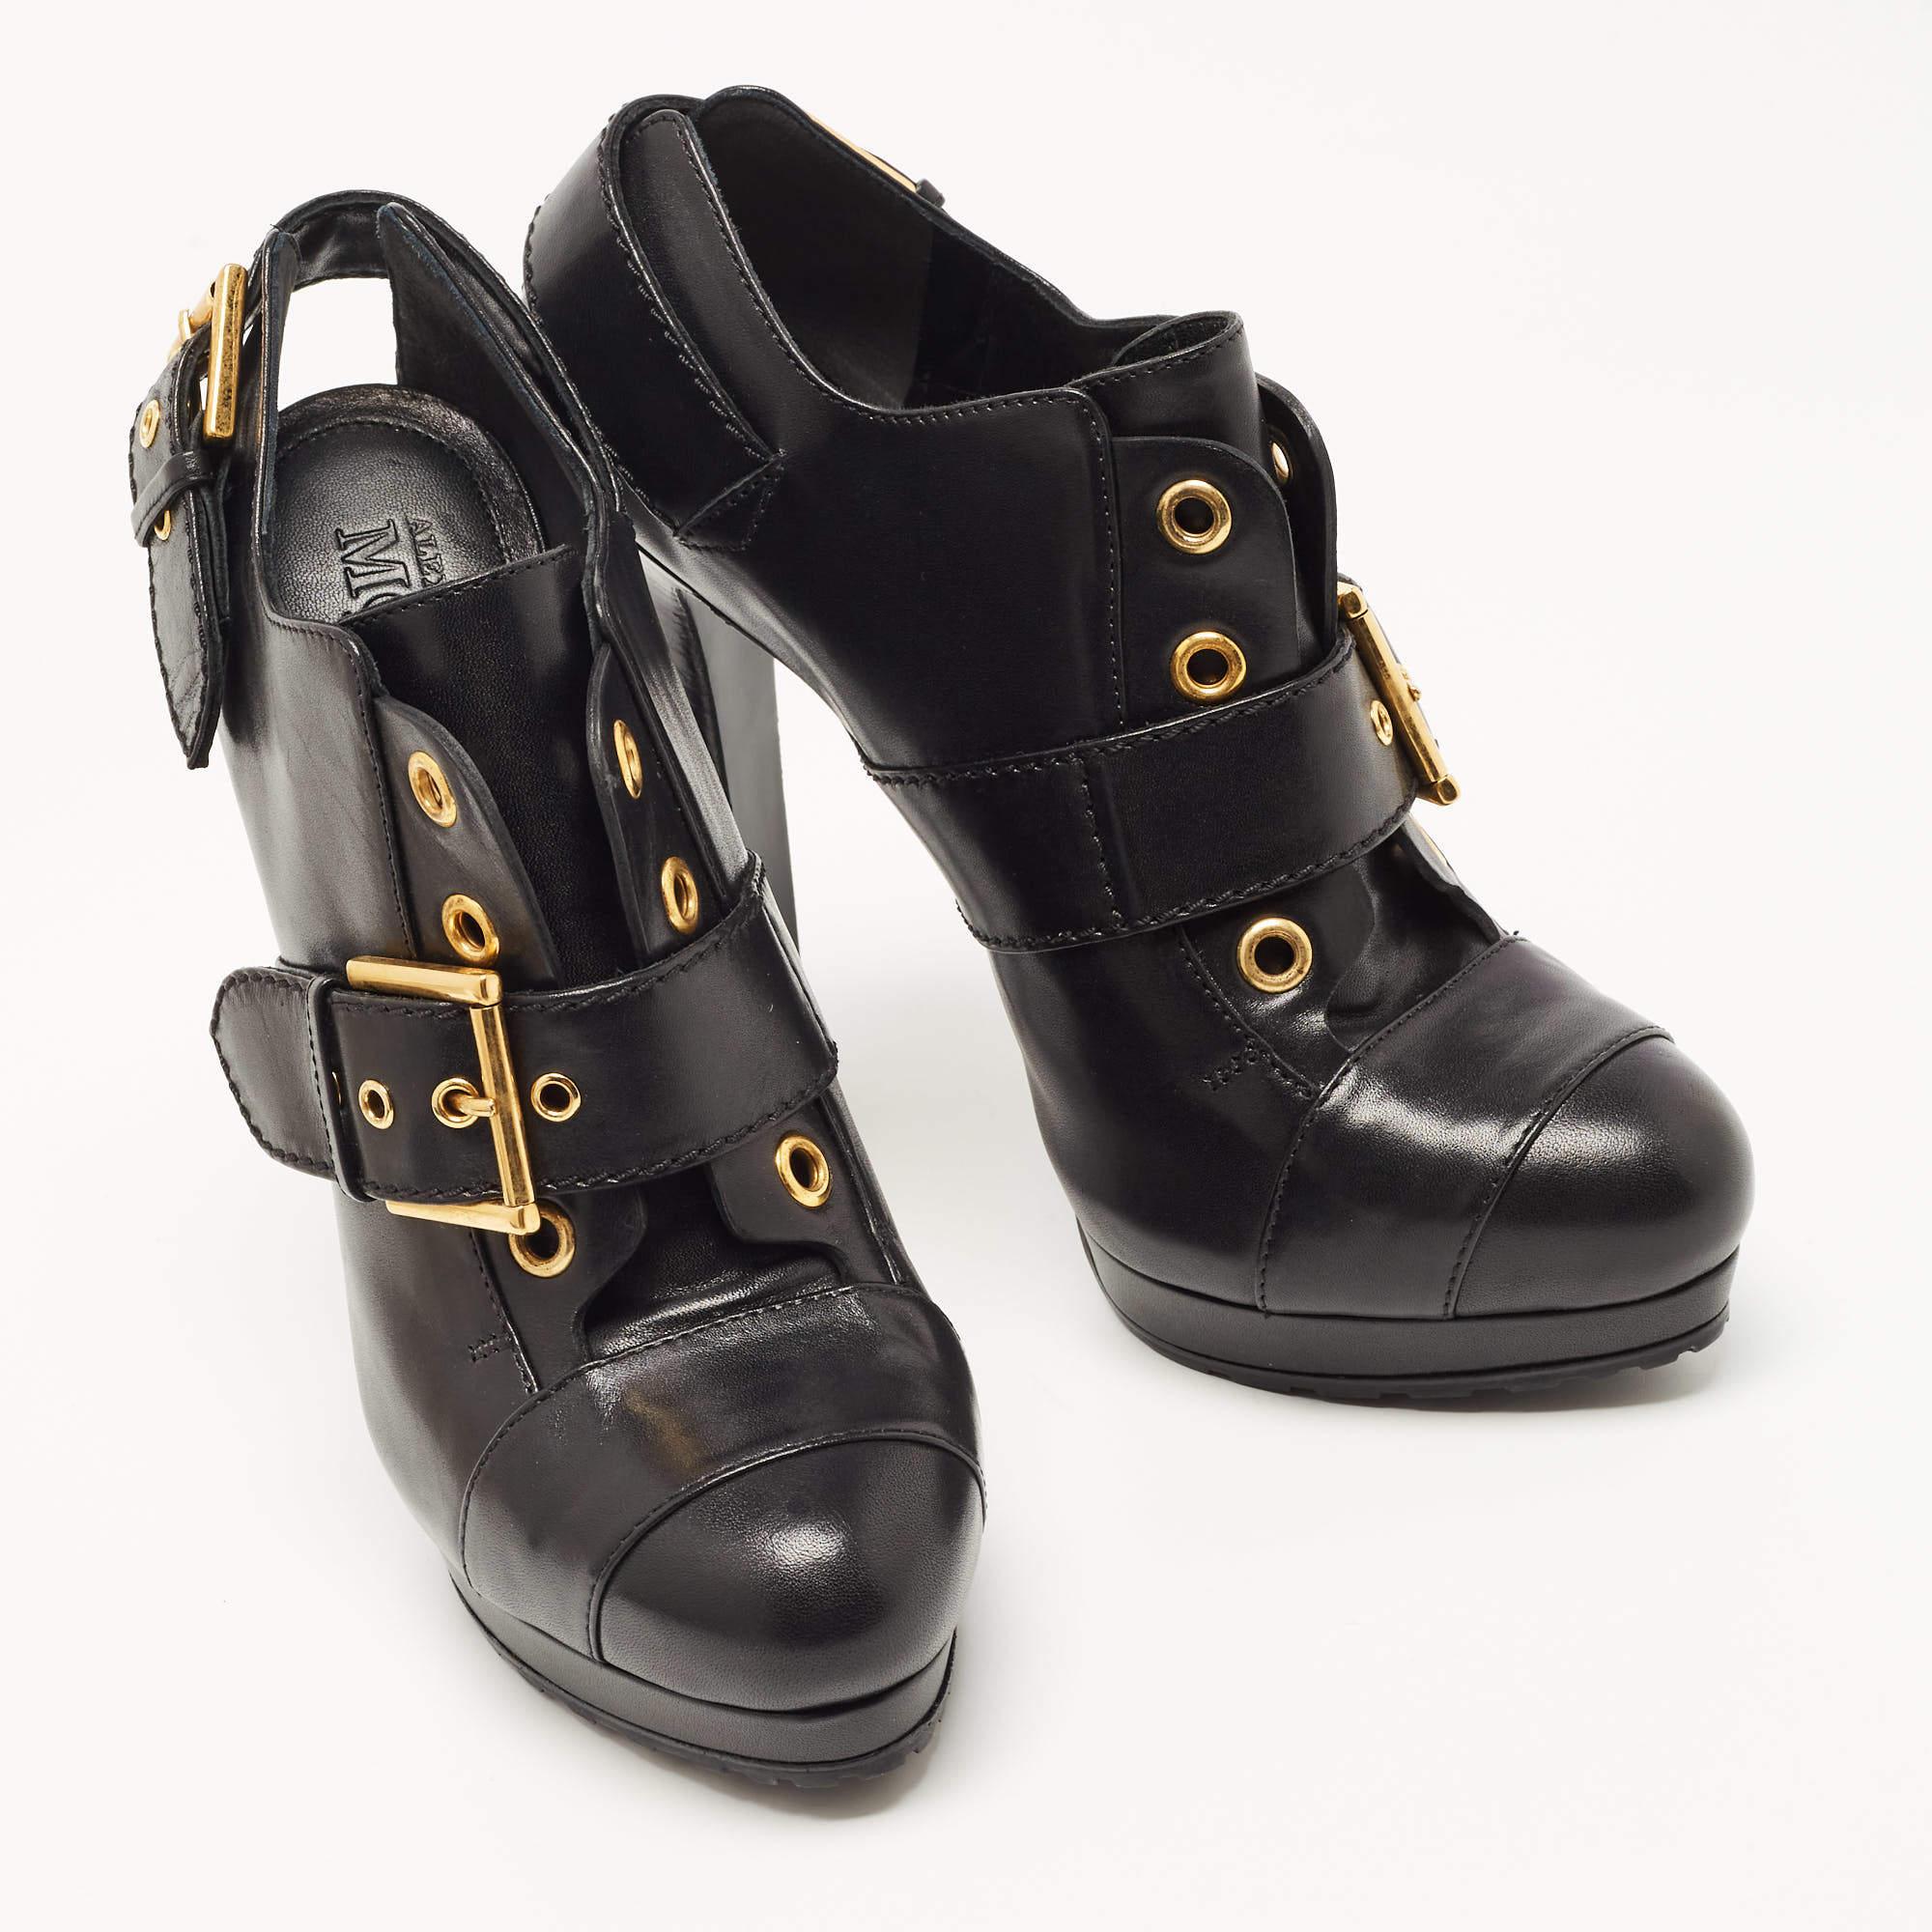 Women's Alexander McQueen Black Leather Ankle Boots 